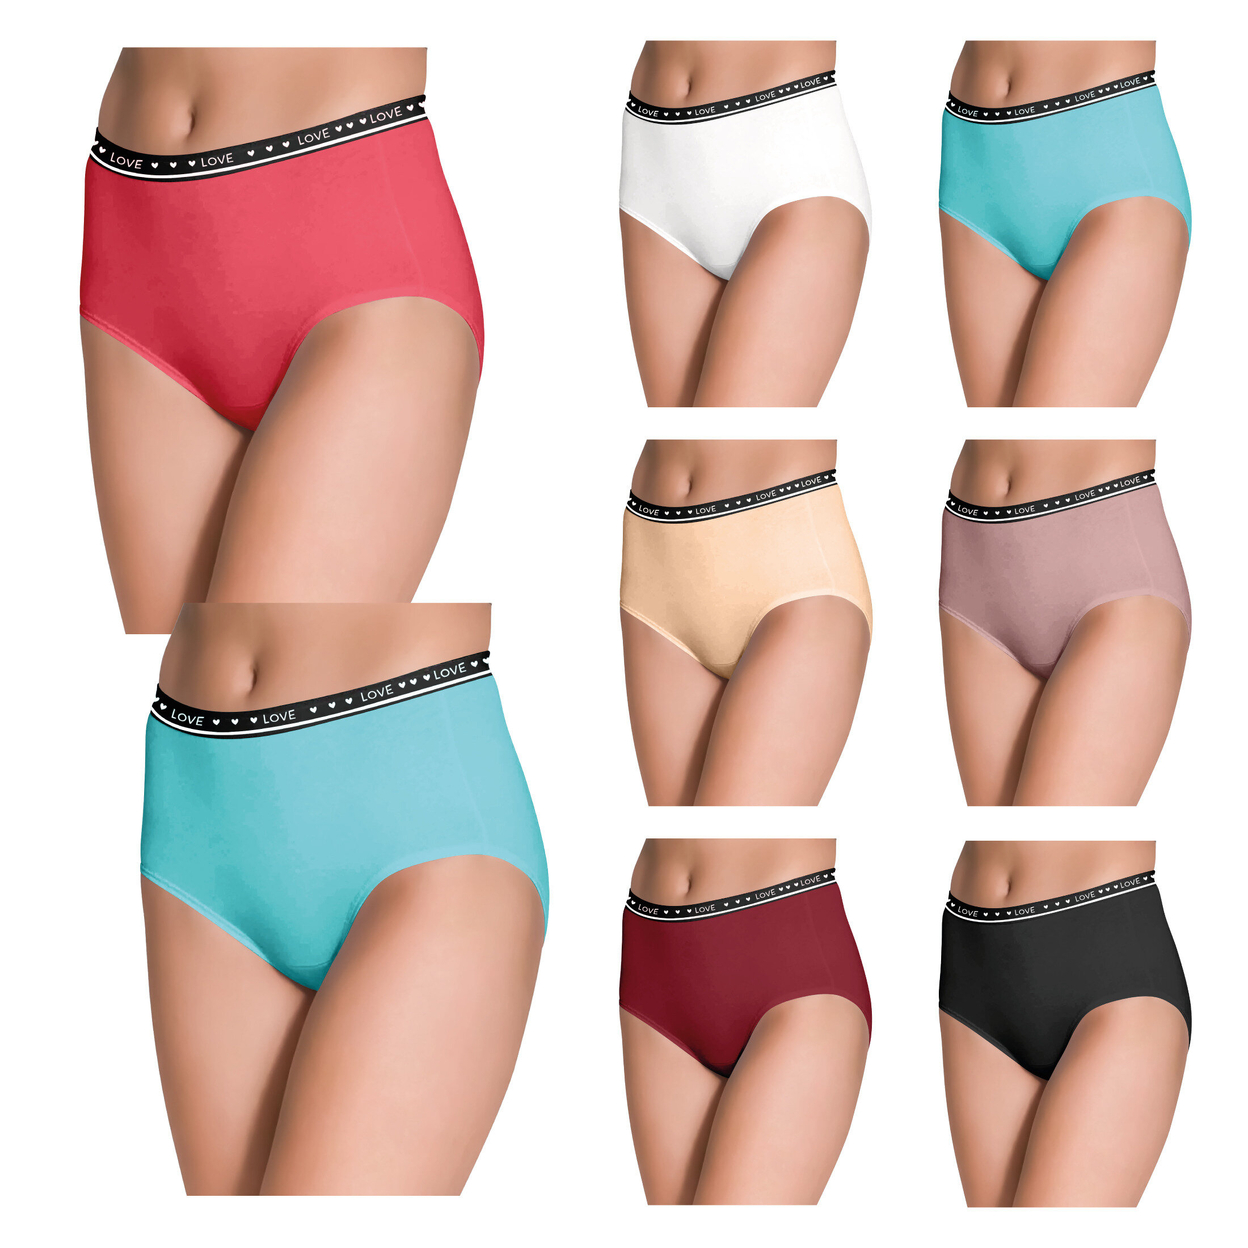 3-Pack: Women's Ultra Soft Moisture Wicking Panties Cotton Perfect Fit Underwear (Plus Sizes Available) - Medium